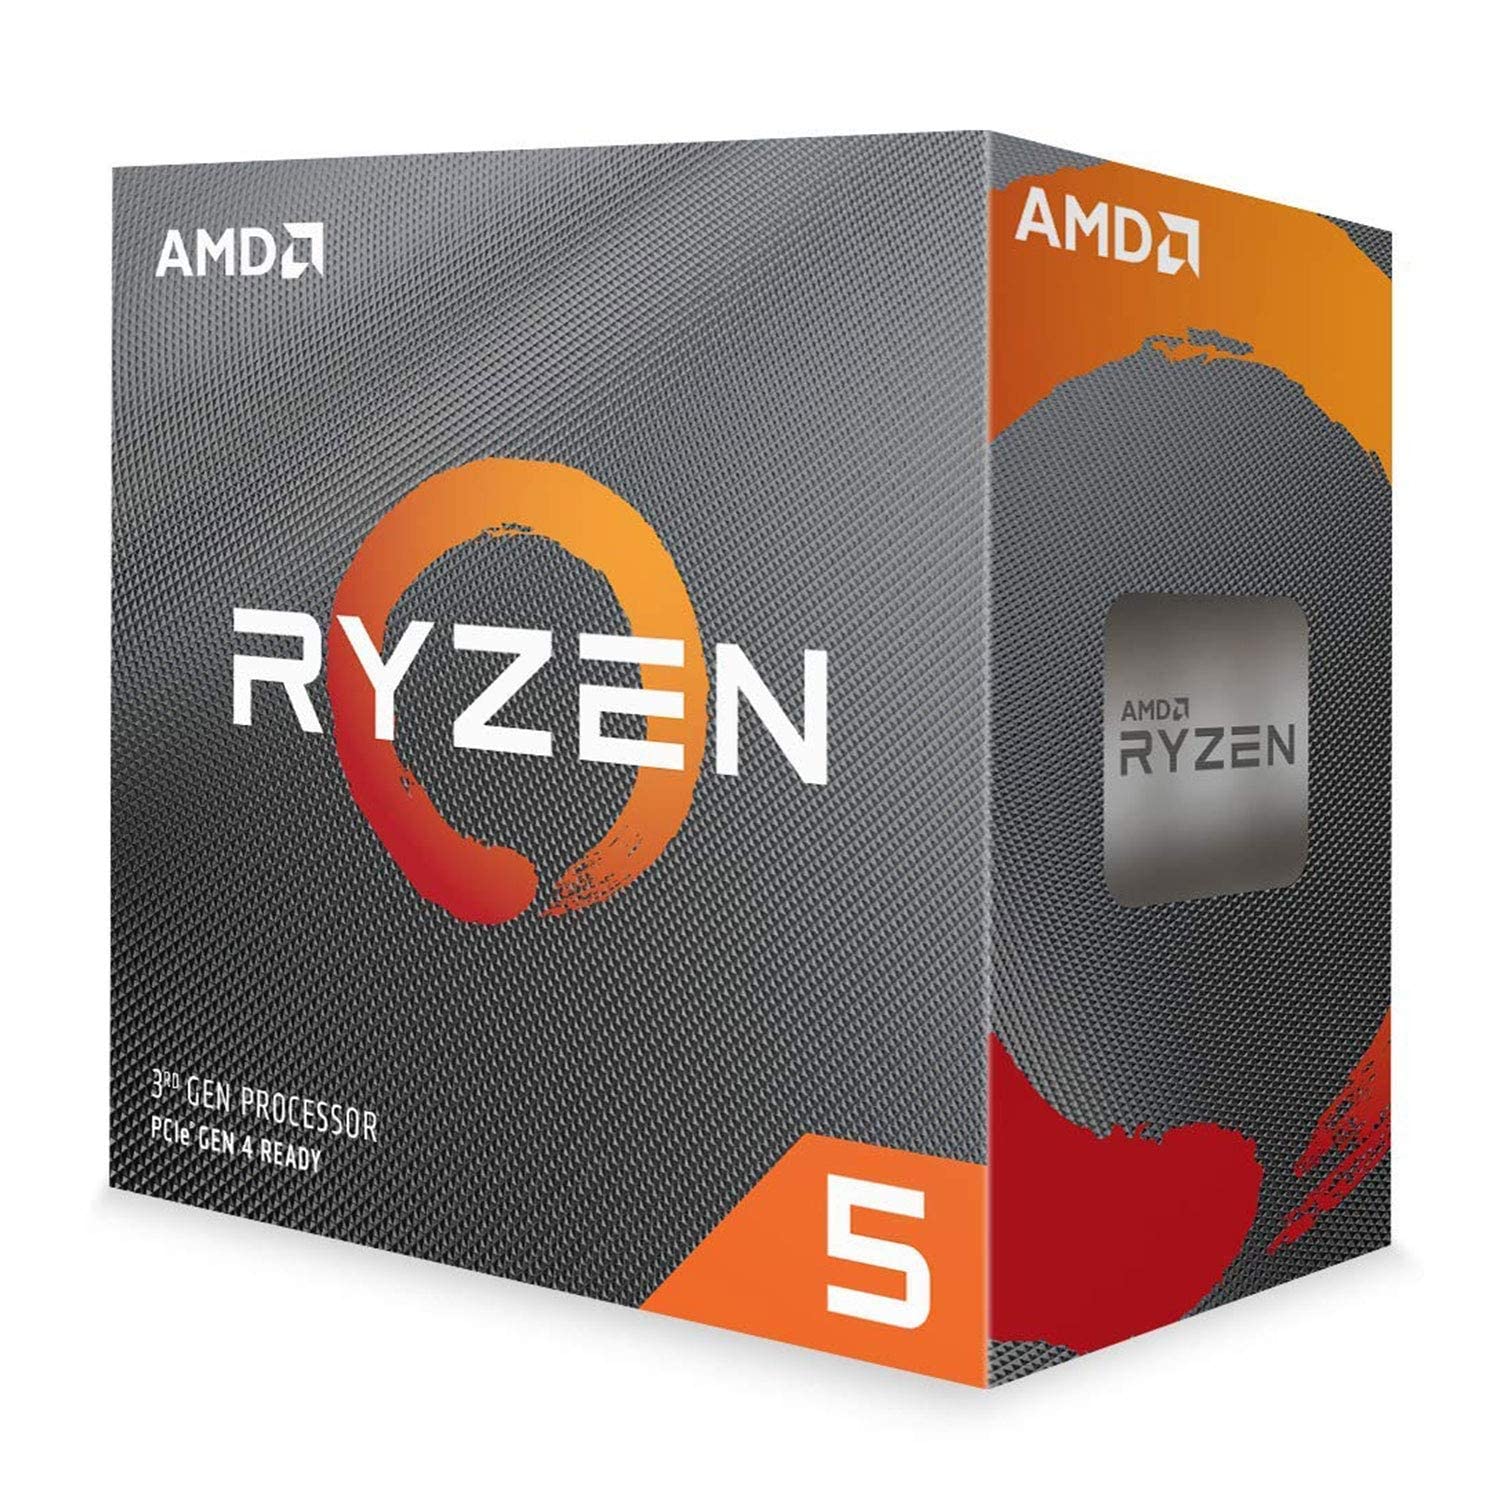 You are currently viewing Maximizing Performance of AMD Ryzen 5 1600X